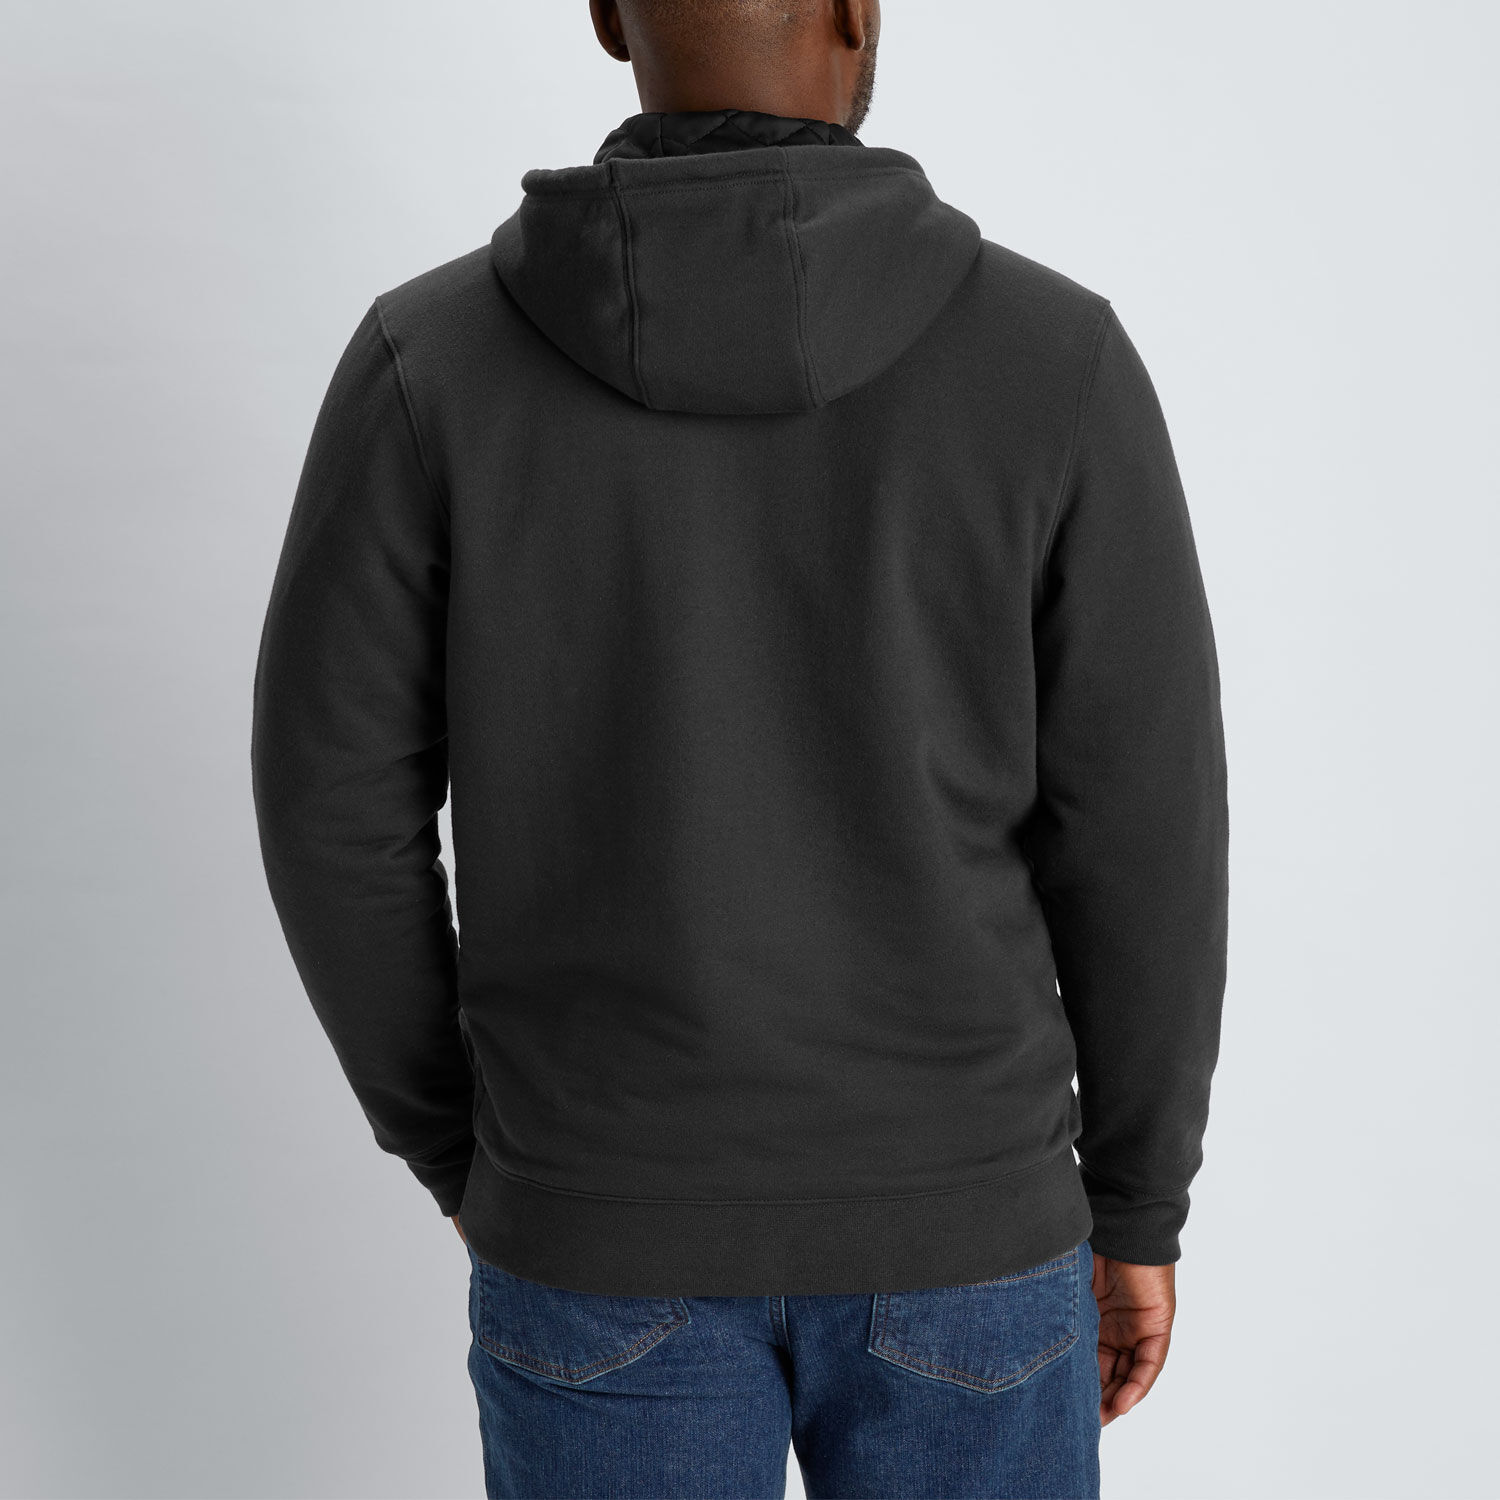 Men's 40 Grit Lined Full Zip Hoodie | Duluth Trading Company